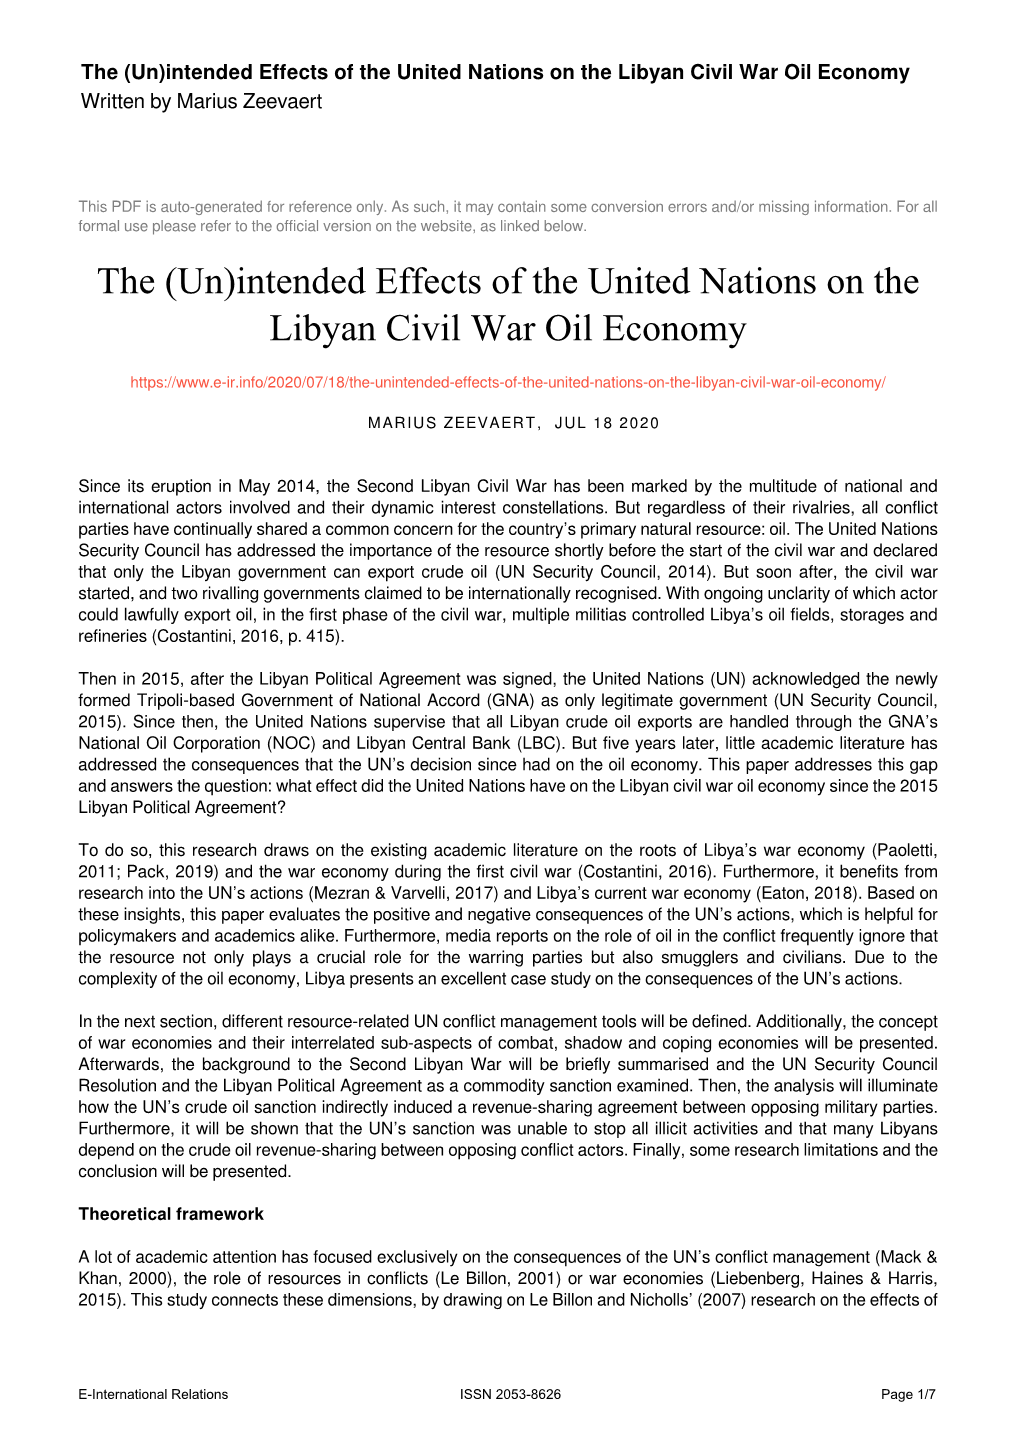 Intended Effects of the United Nations on the Libyan Civil War Oil Economy Written by Marius Zeevaert